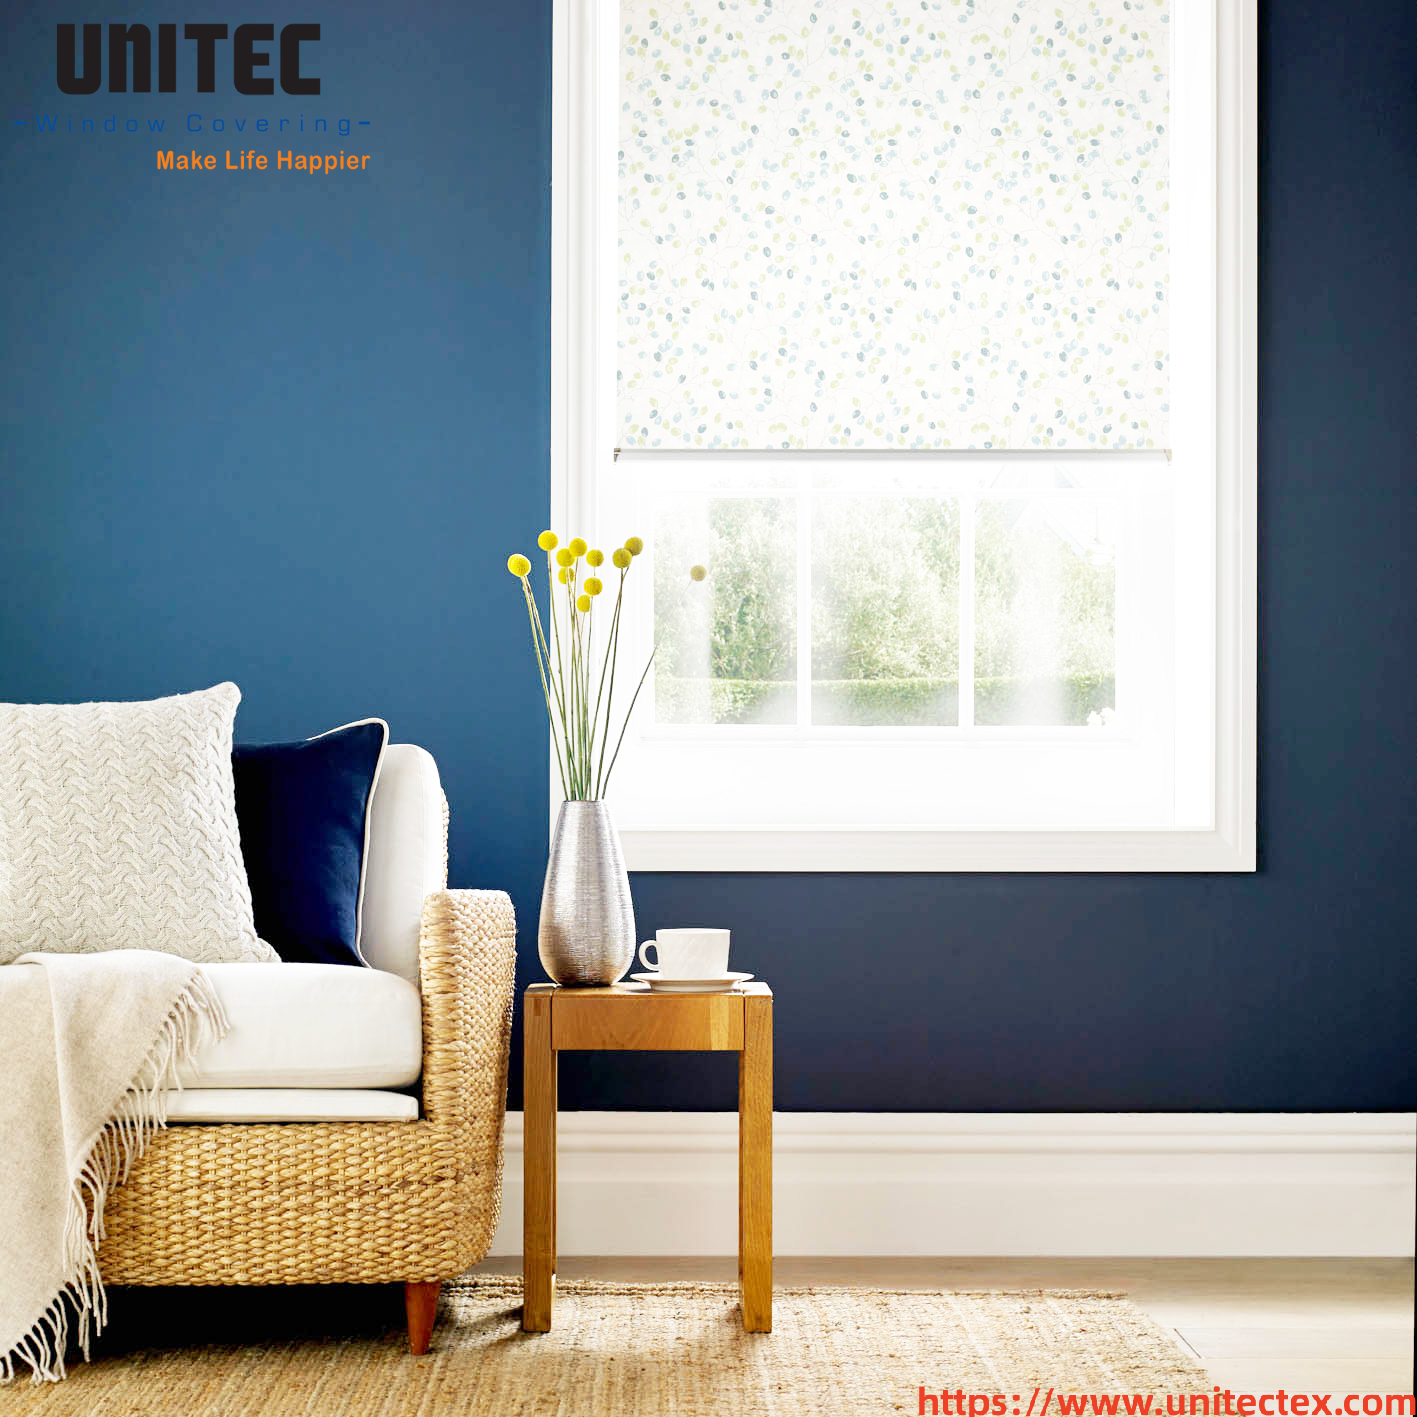 Window privacy curtain, Roller Blinds, Honeycomb Blinds…. Do You Know All These Curtain Categories?​